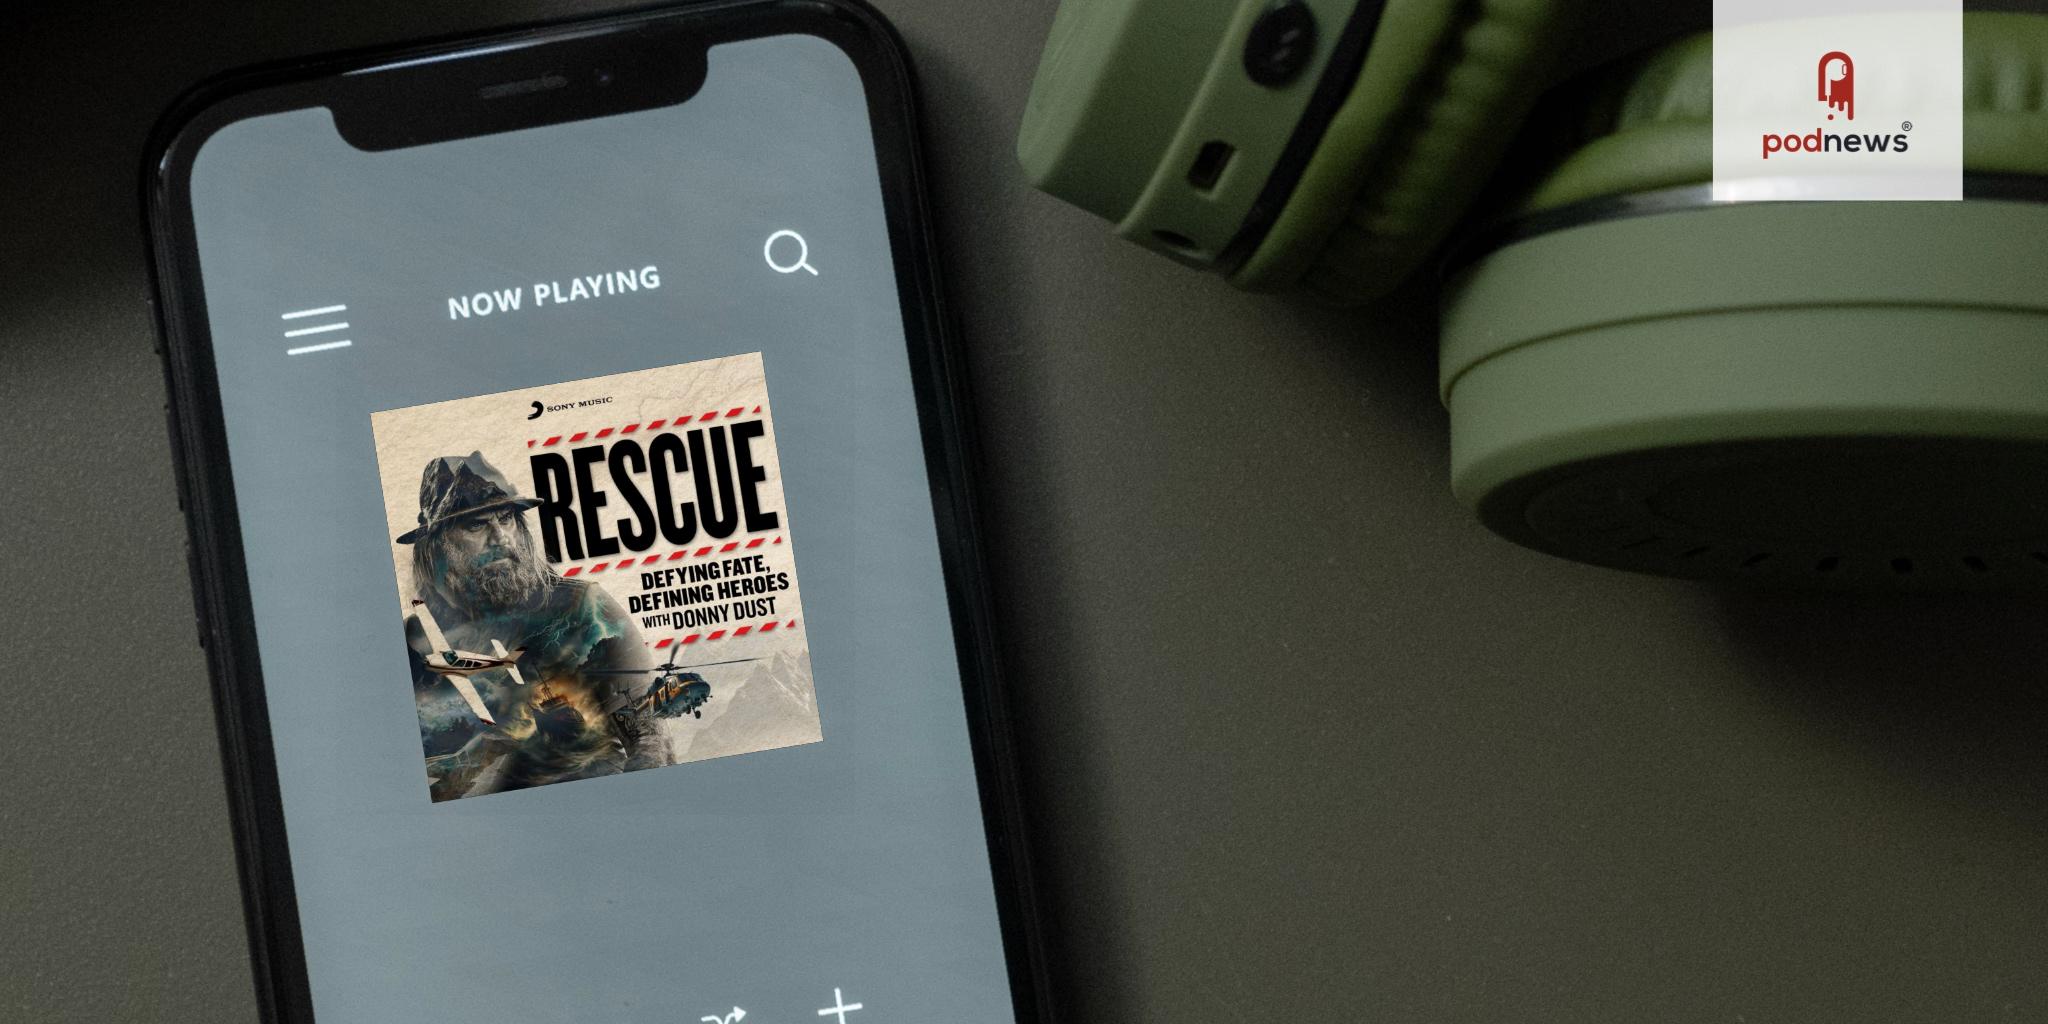 Sony Music Entertainment announces Rescue, a new podcast about the world's most astonishing rescue stories